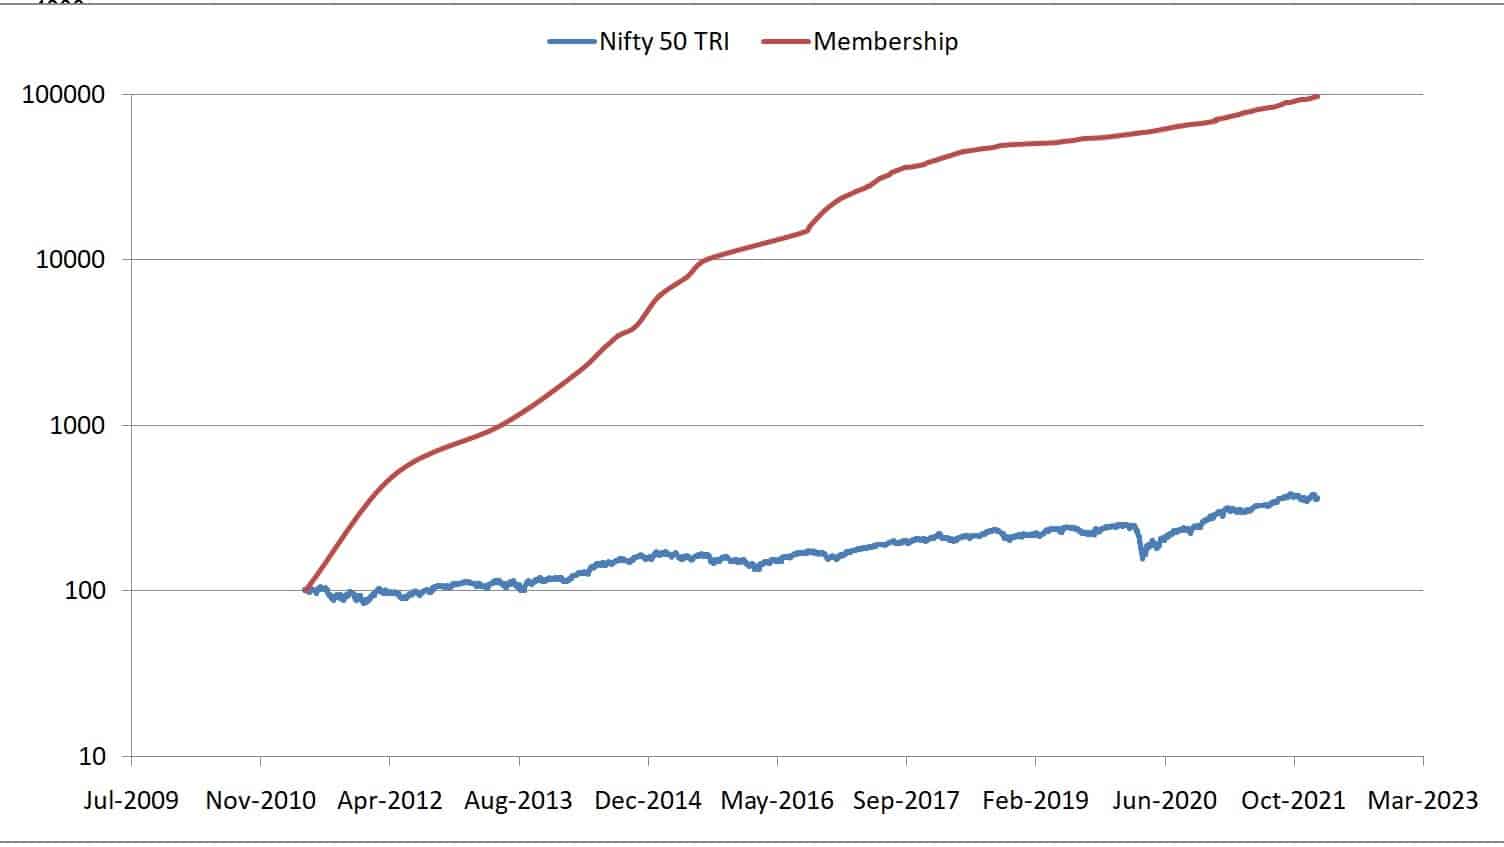 Asan Ideas for Wealth Facebook group membership compared with Nifty 50 TRI growth since the inception of the group